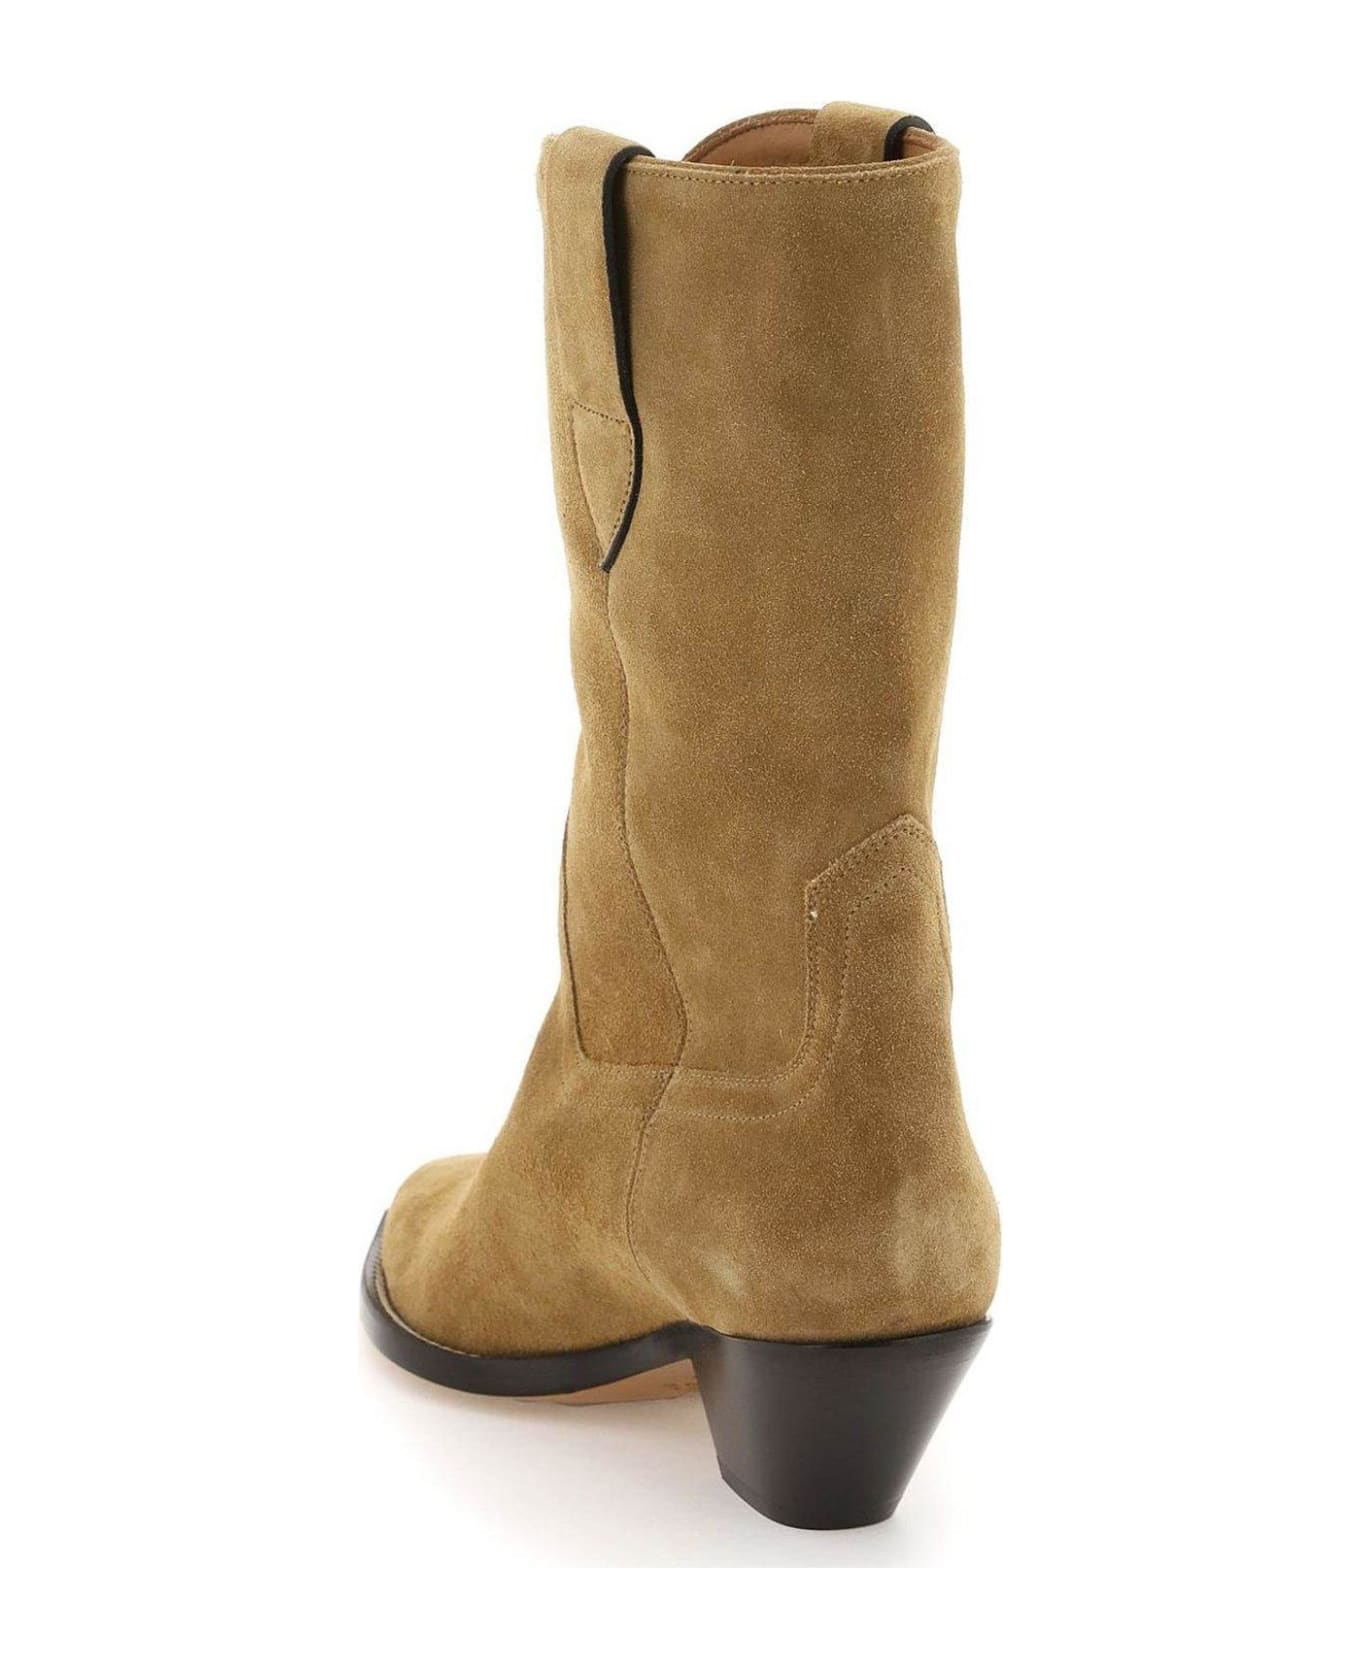 Isabel Marant Duerto Pointed Toe Boots - TAUPE ブーツ